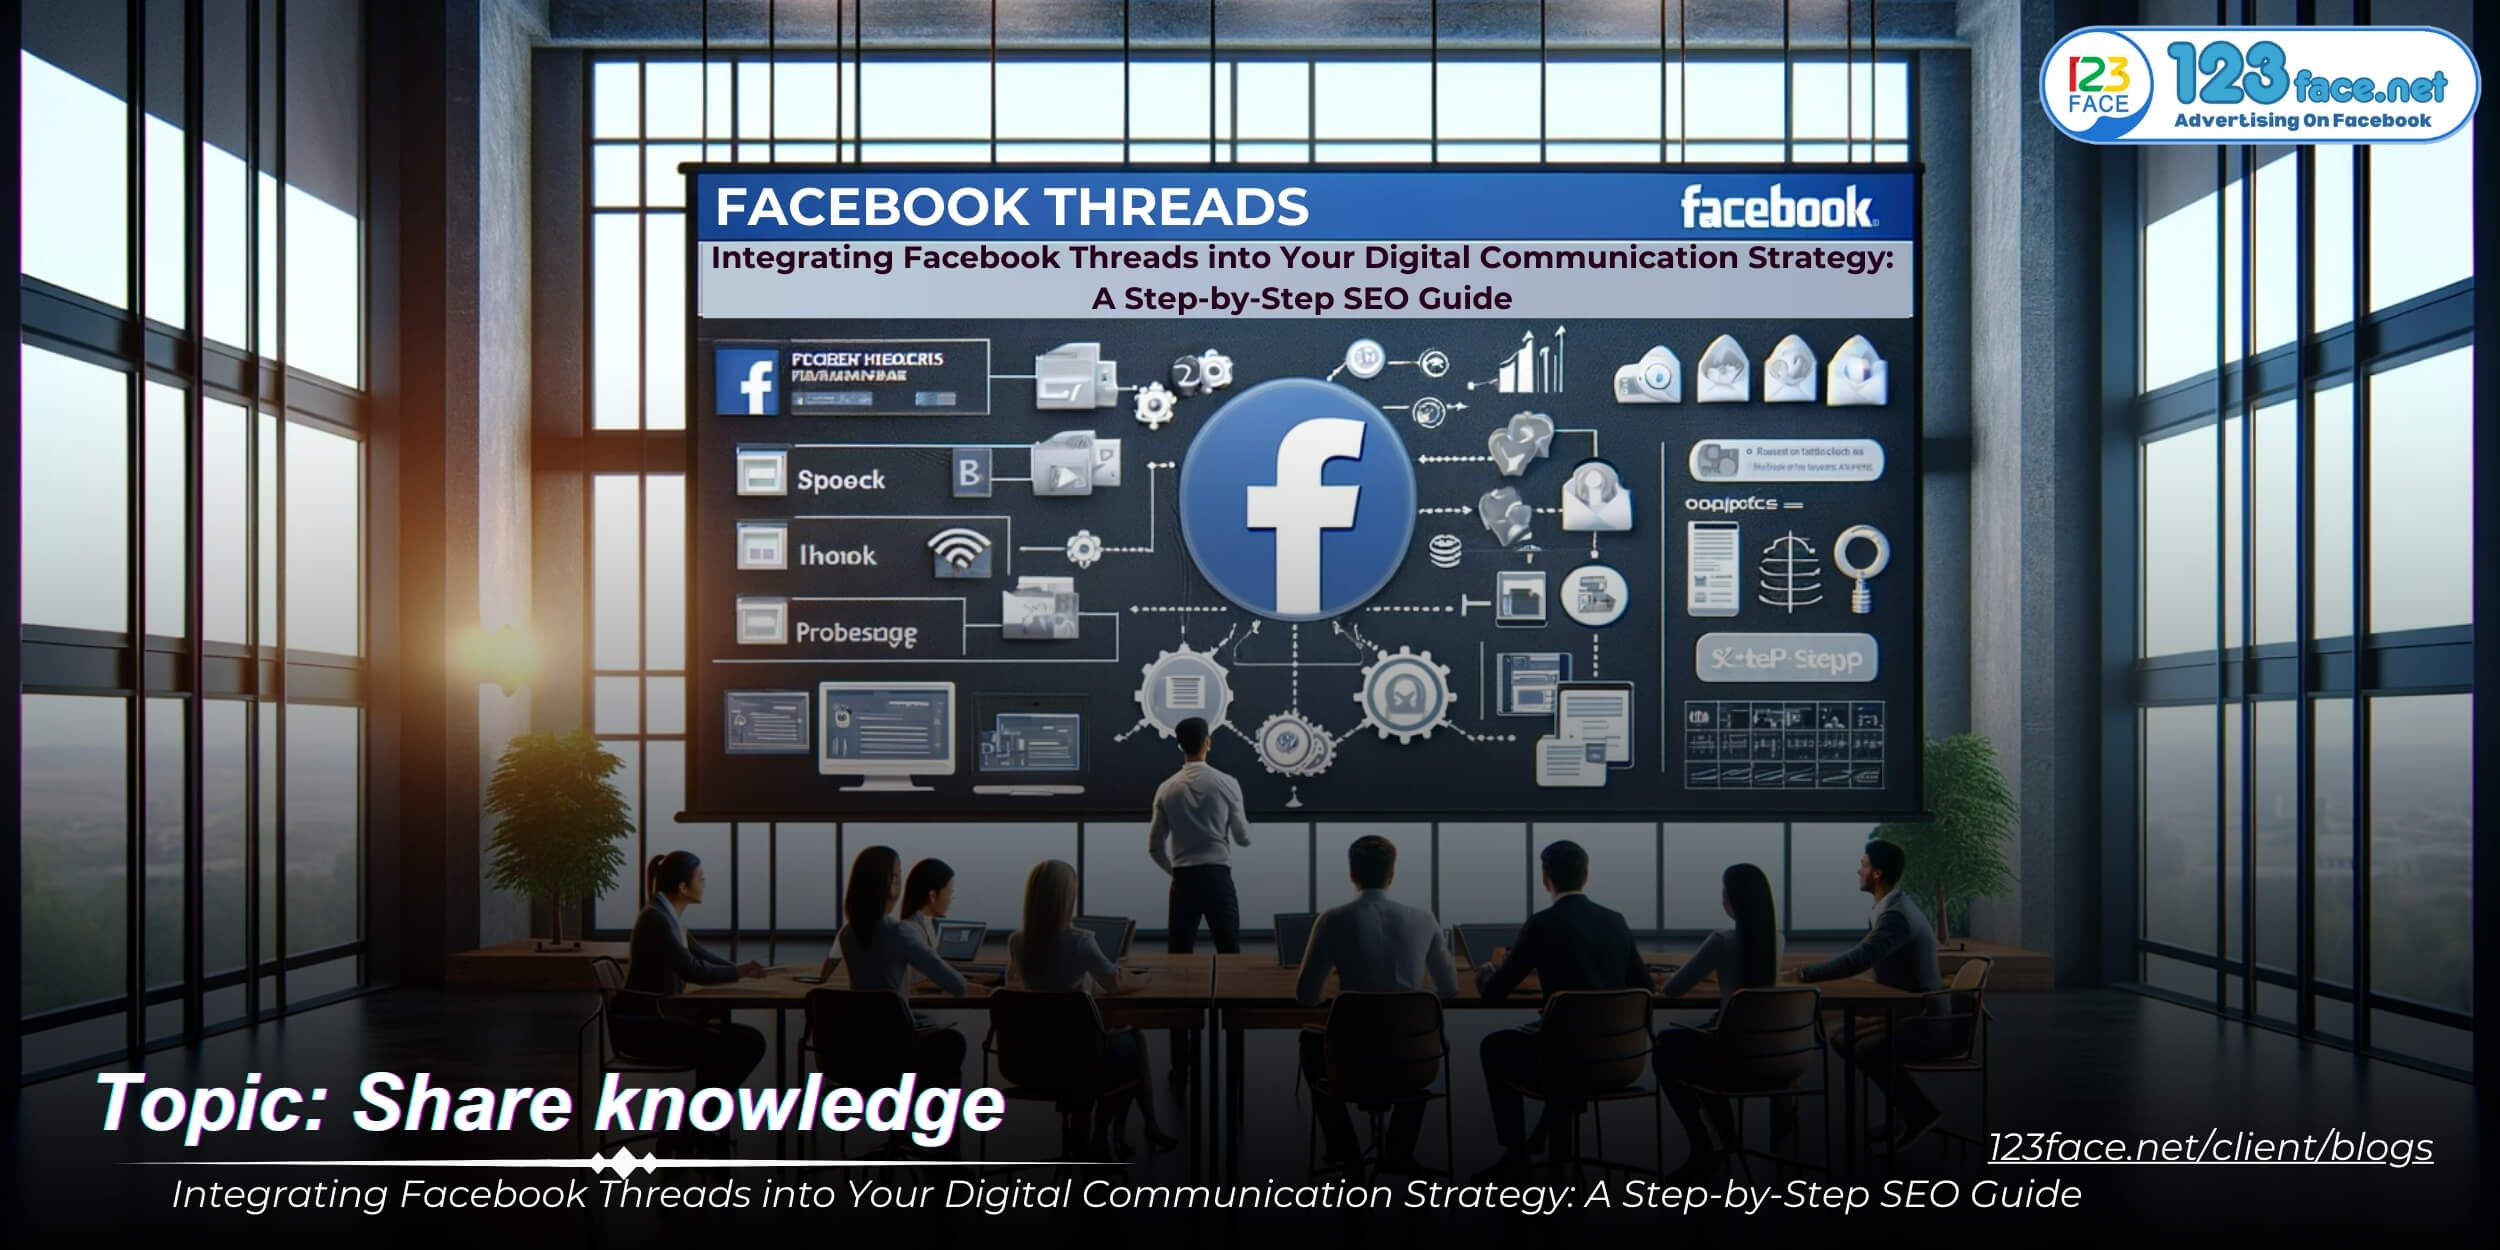 Integrating Facebook Threads into Your Digital Communication Strategy: A Step-by-Step SEO Guide